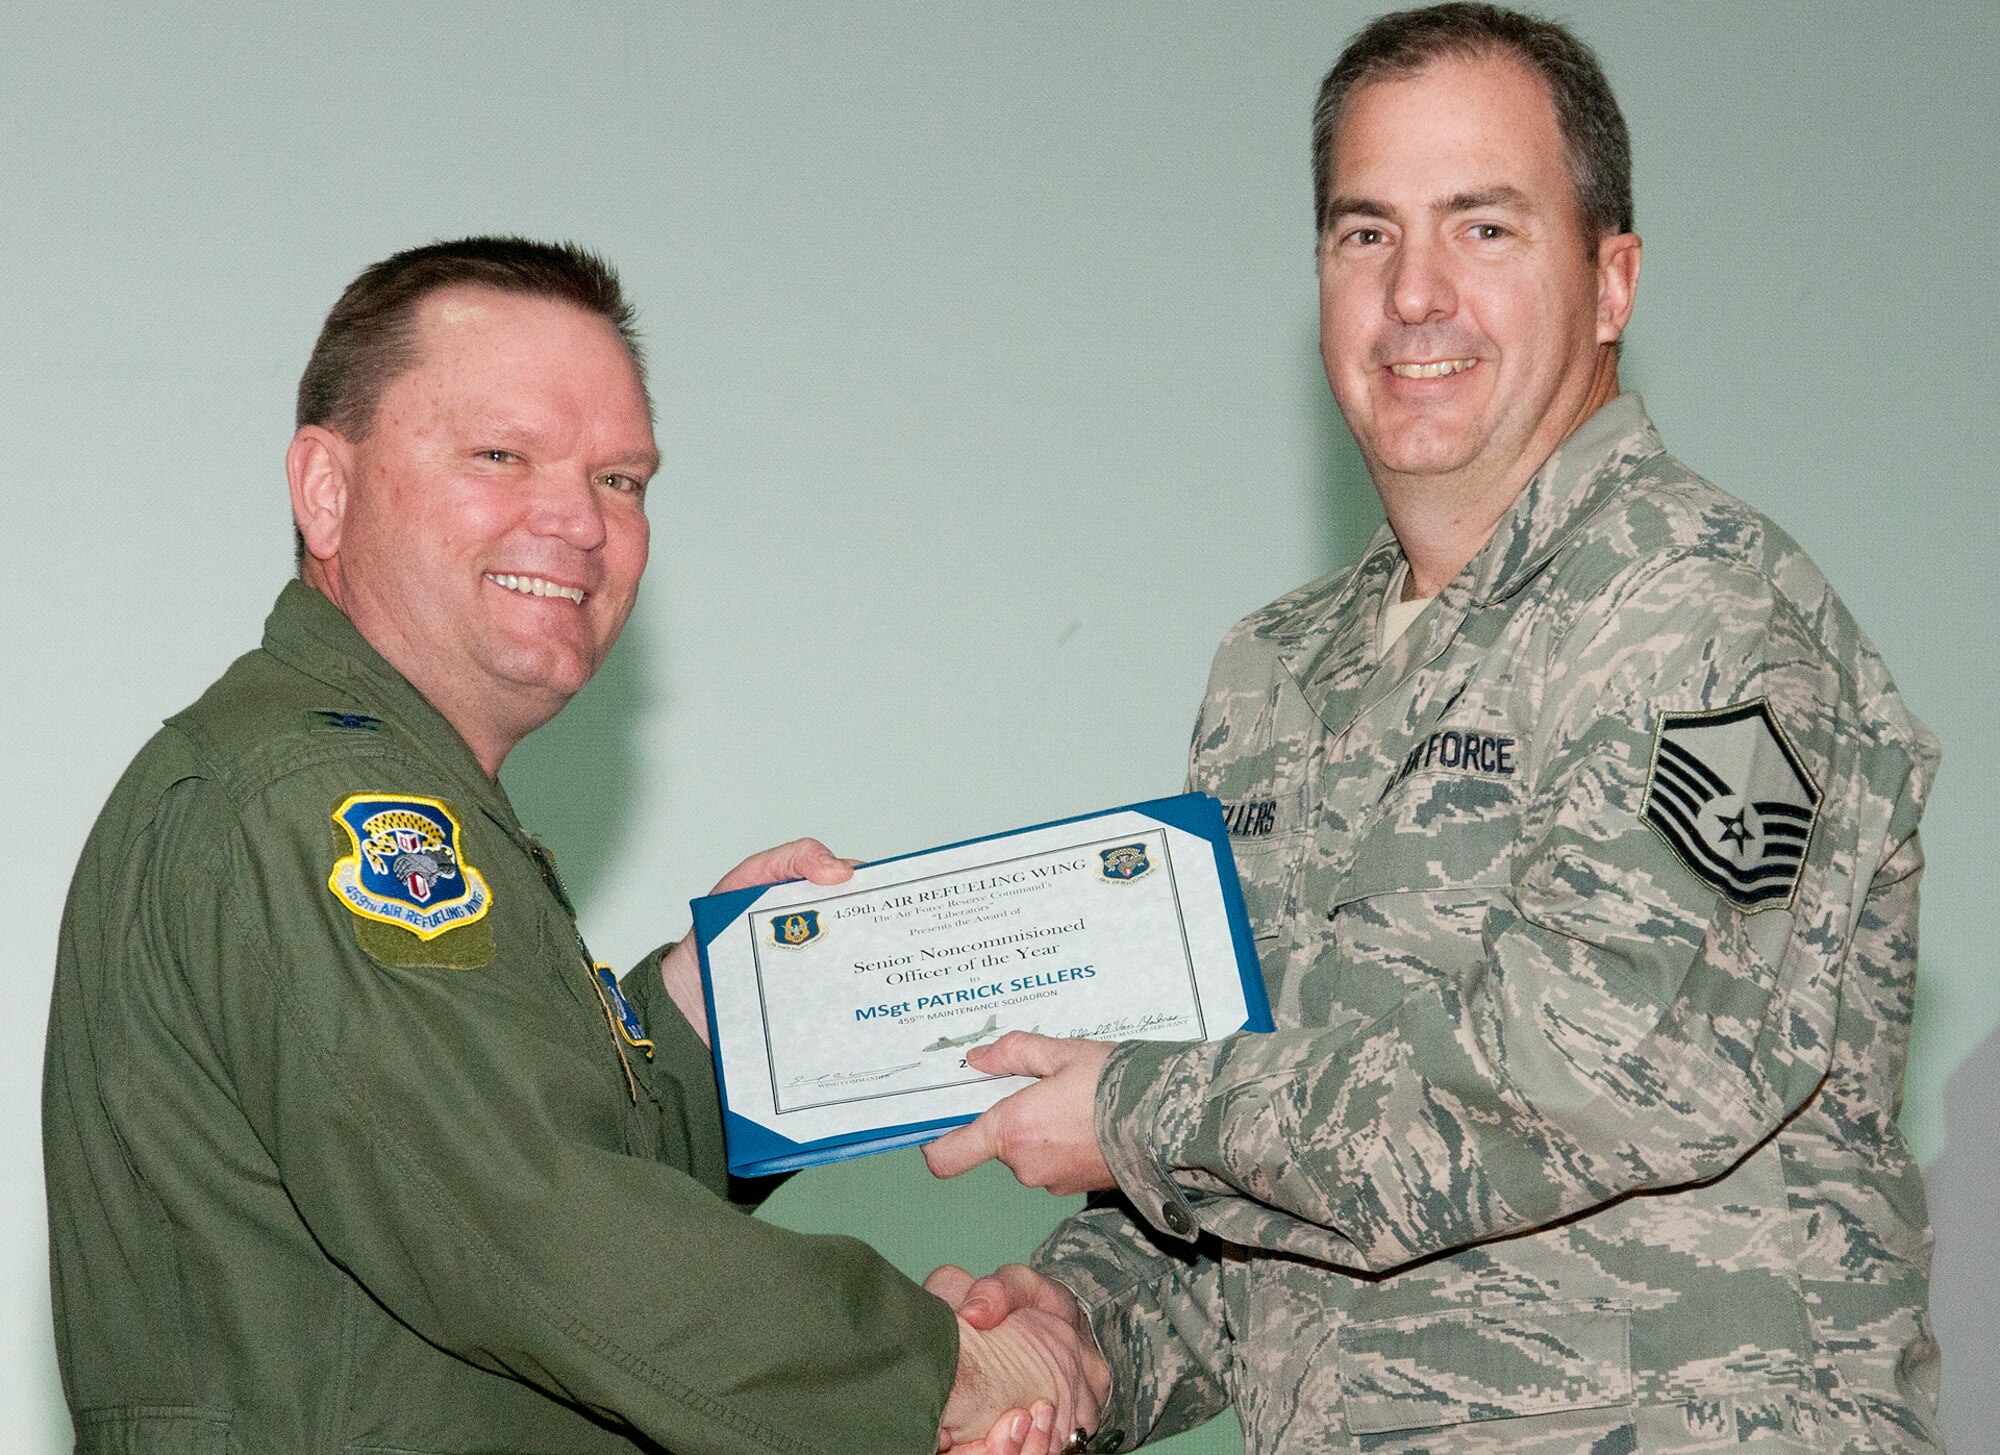 JOINT BASE ANDREWS, Md. -- Col. Samuel Mahaney, 459th Air Refueling Wing commander, congratulates Master Sgt. Patrick Sellers, 459th Maintenance Squadron, for being awarded 459th ARW Senior Noncommissioned Officer of the Year for 2011 during a commander's call here Feb. 12, 2012. (U.S. Air Force photo/Staff Sgt. Brent Skeen)